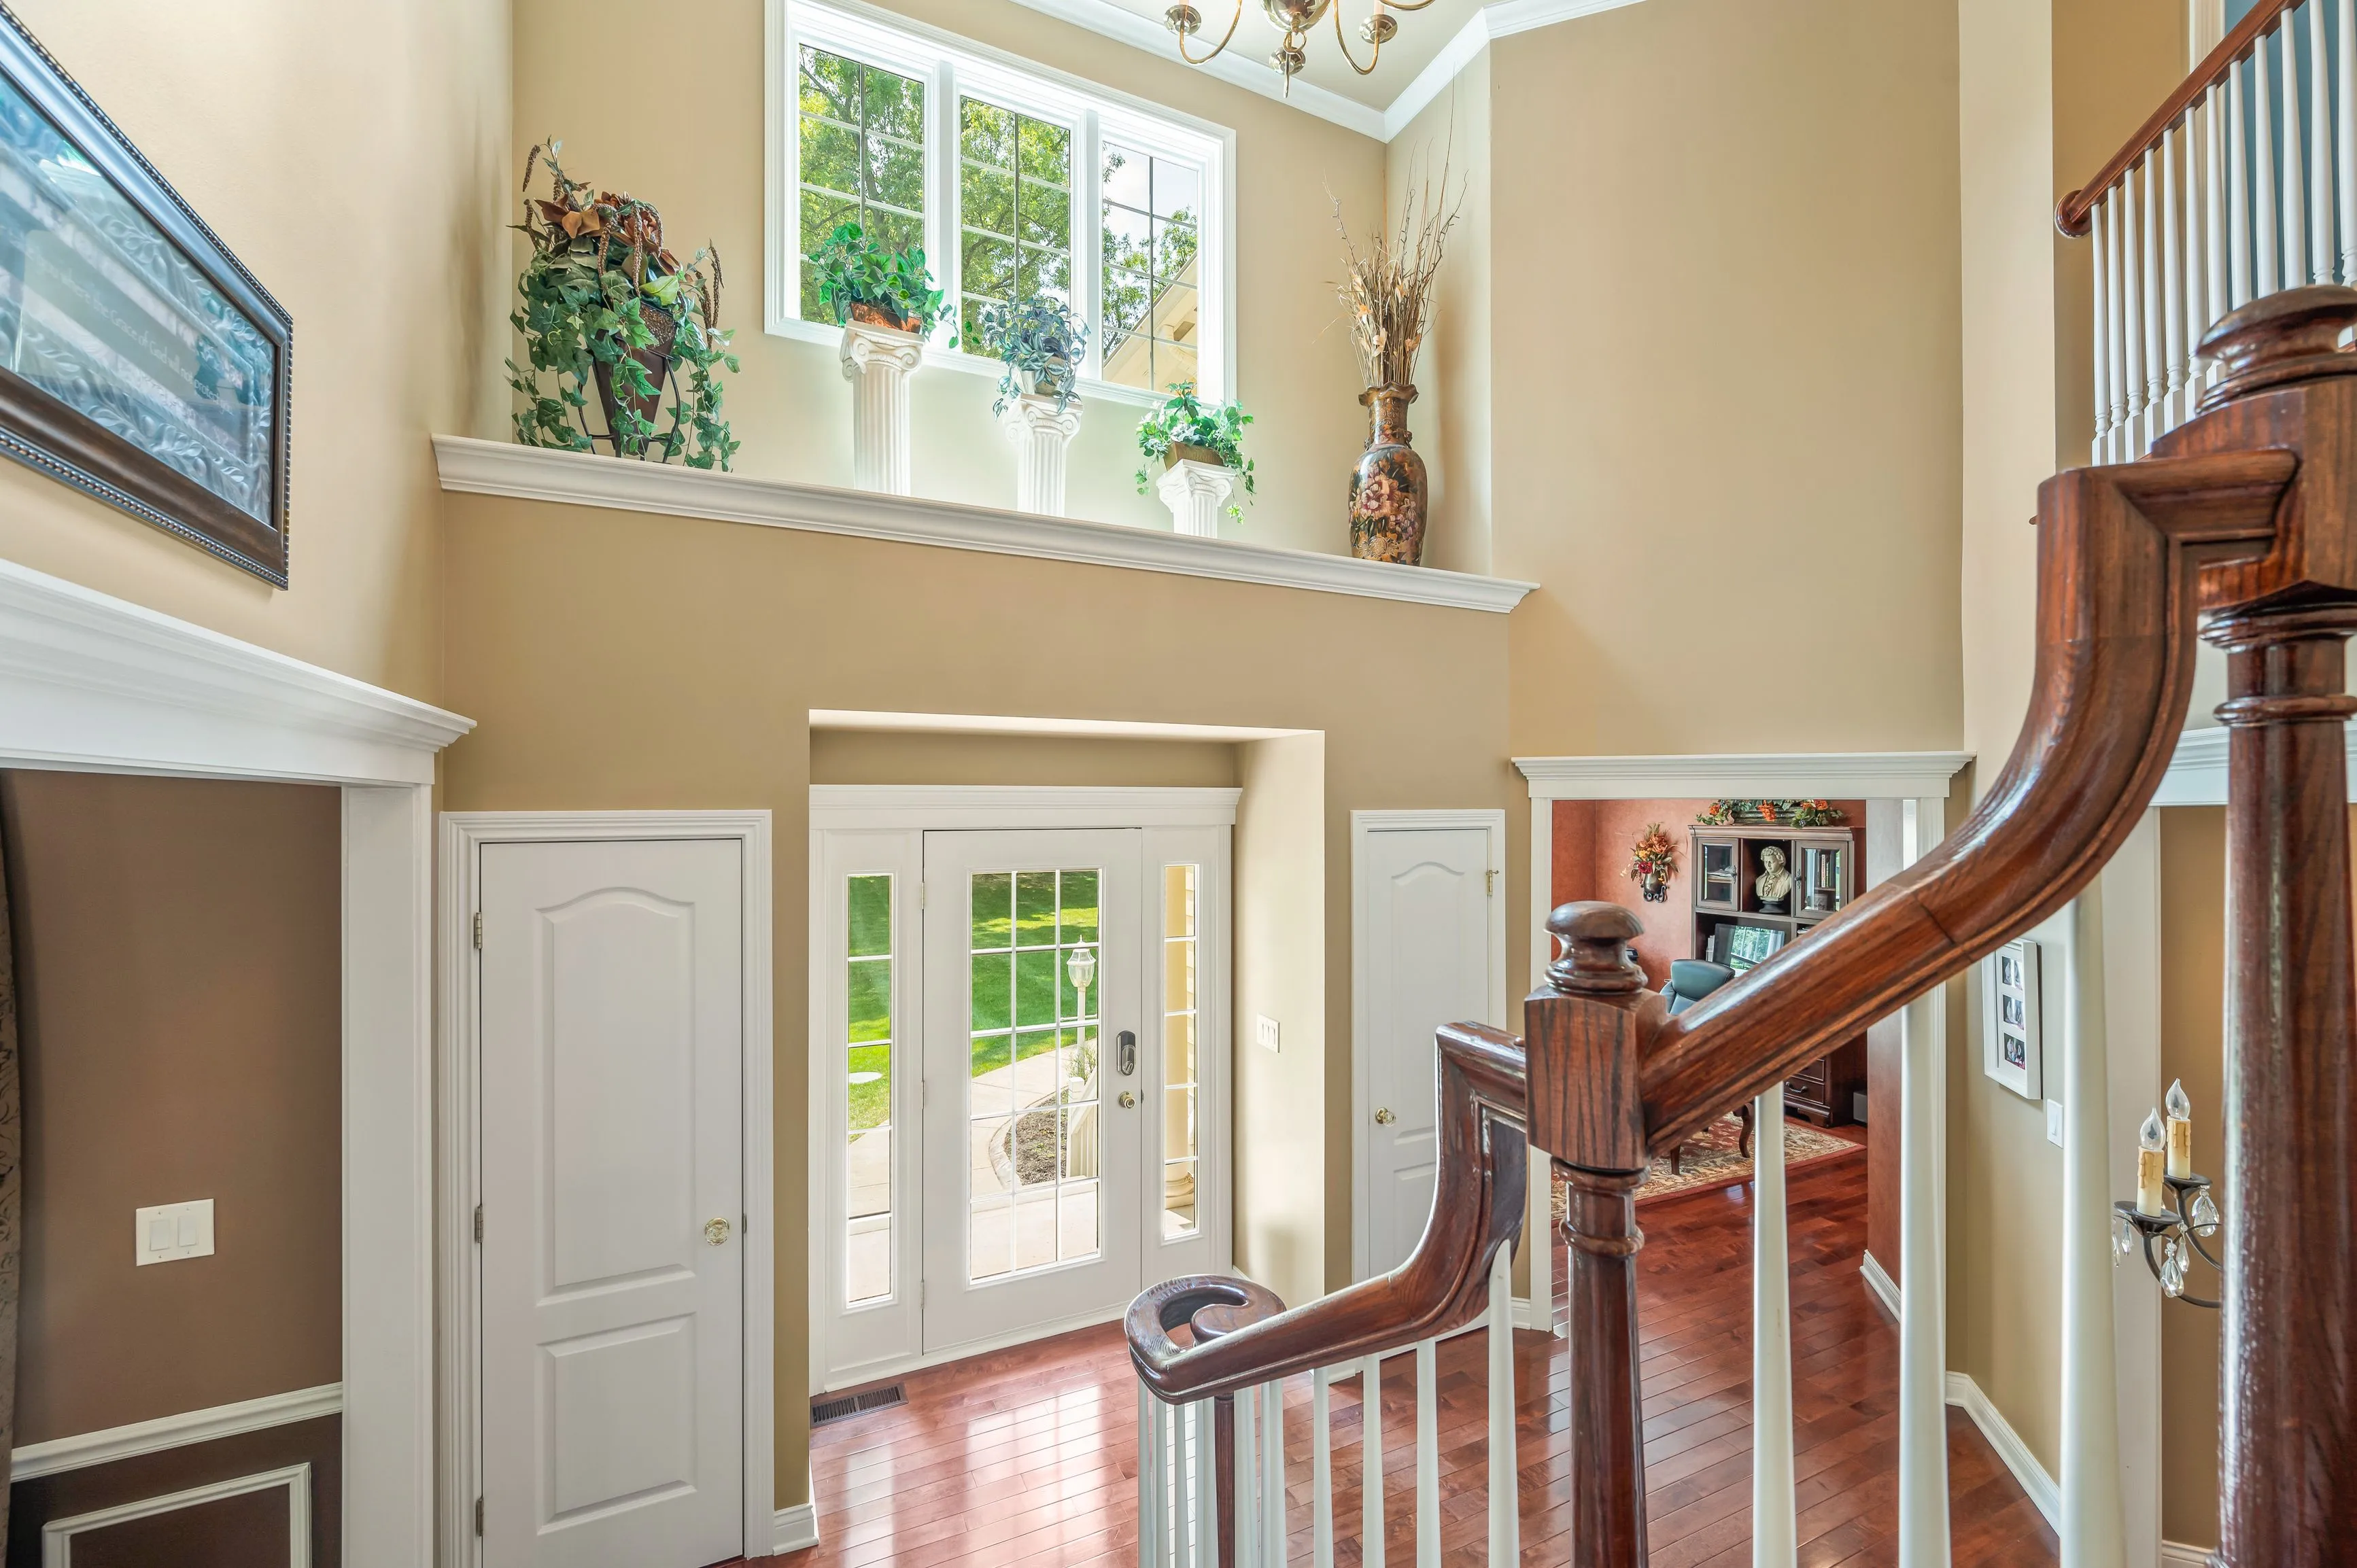 Elegant interior of a home foyer with a wooden staircase, high ceilings, and natural light from windows.